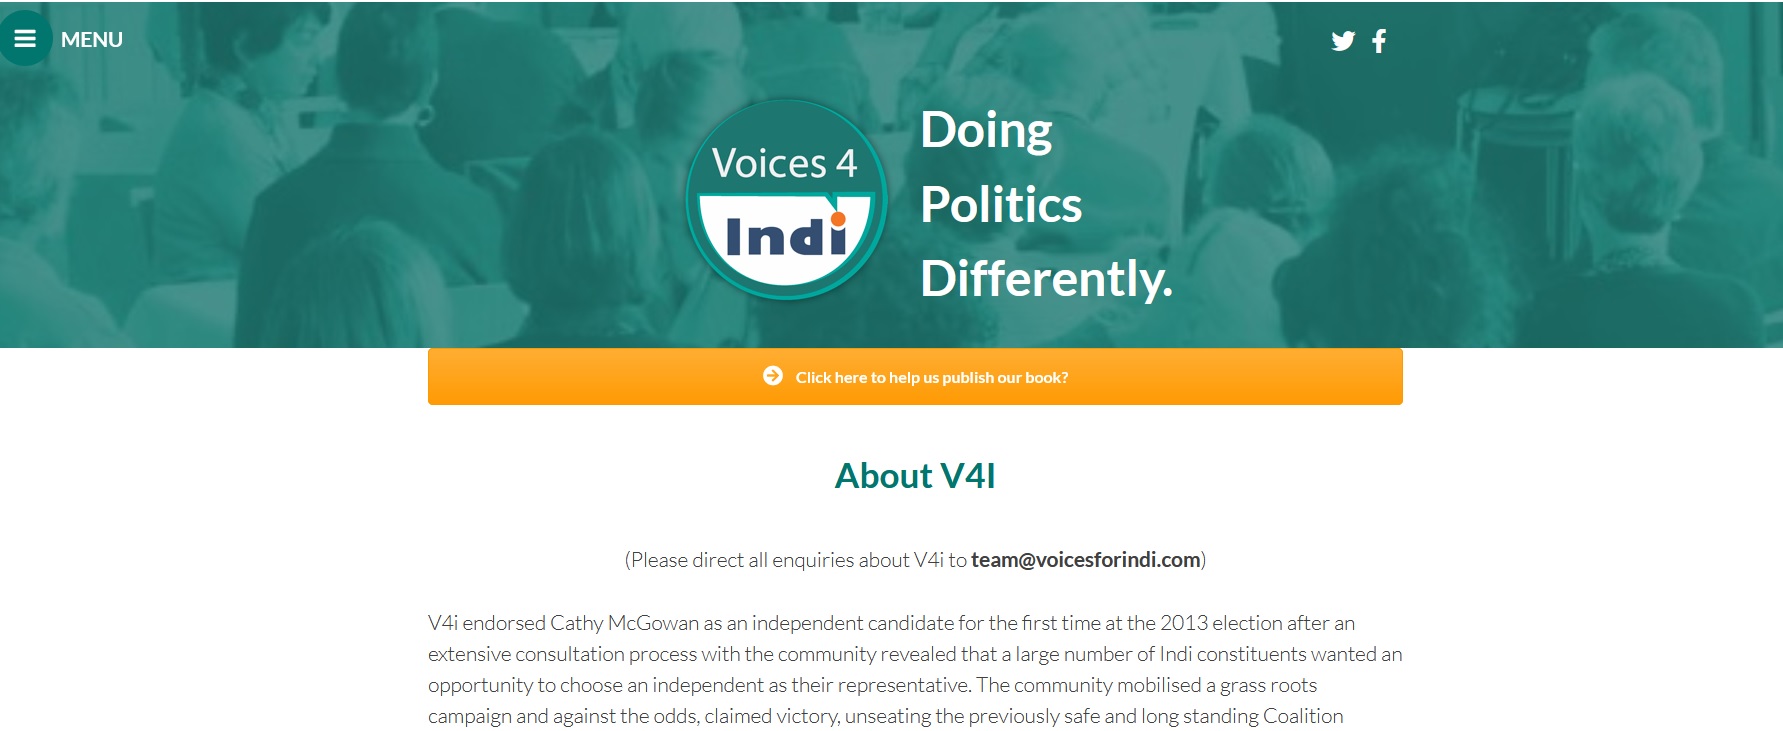 Screenshot from website Voices 4 Indi